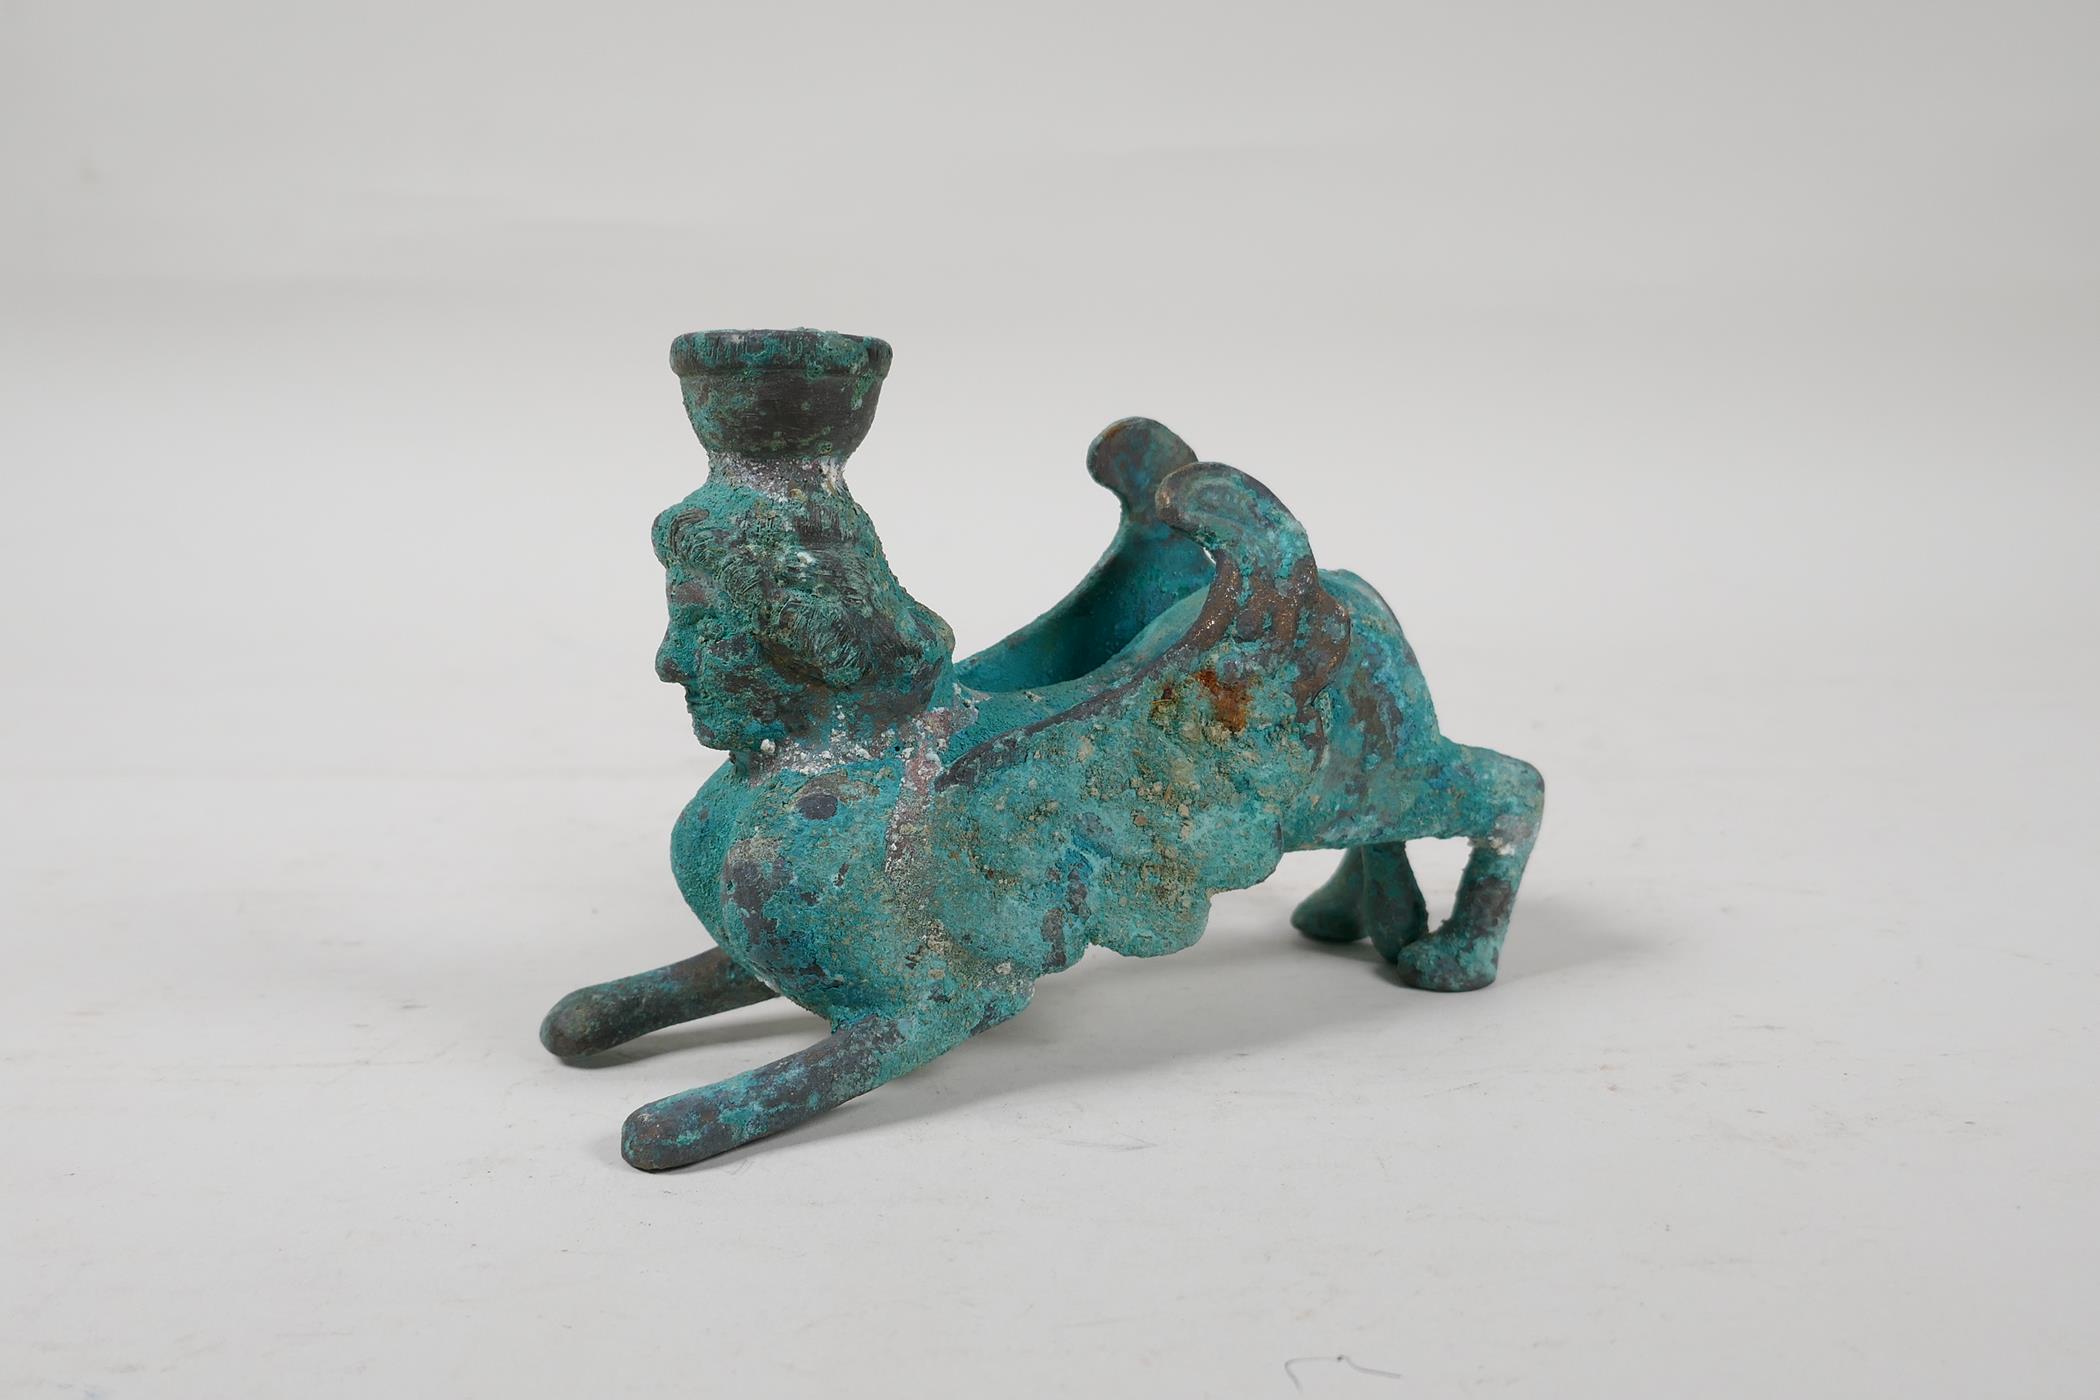 An antique bronze candlestick in the form of a Harpy, with verdigris patina, 5½" long - Image 4 of 5